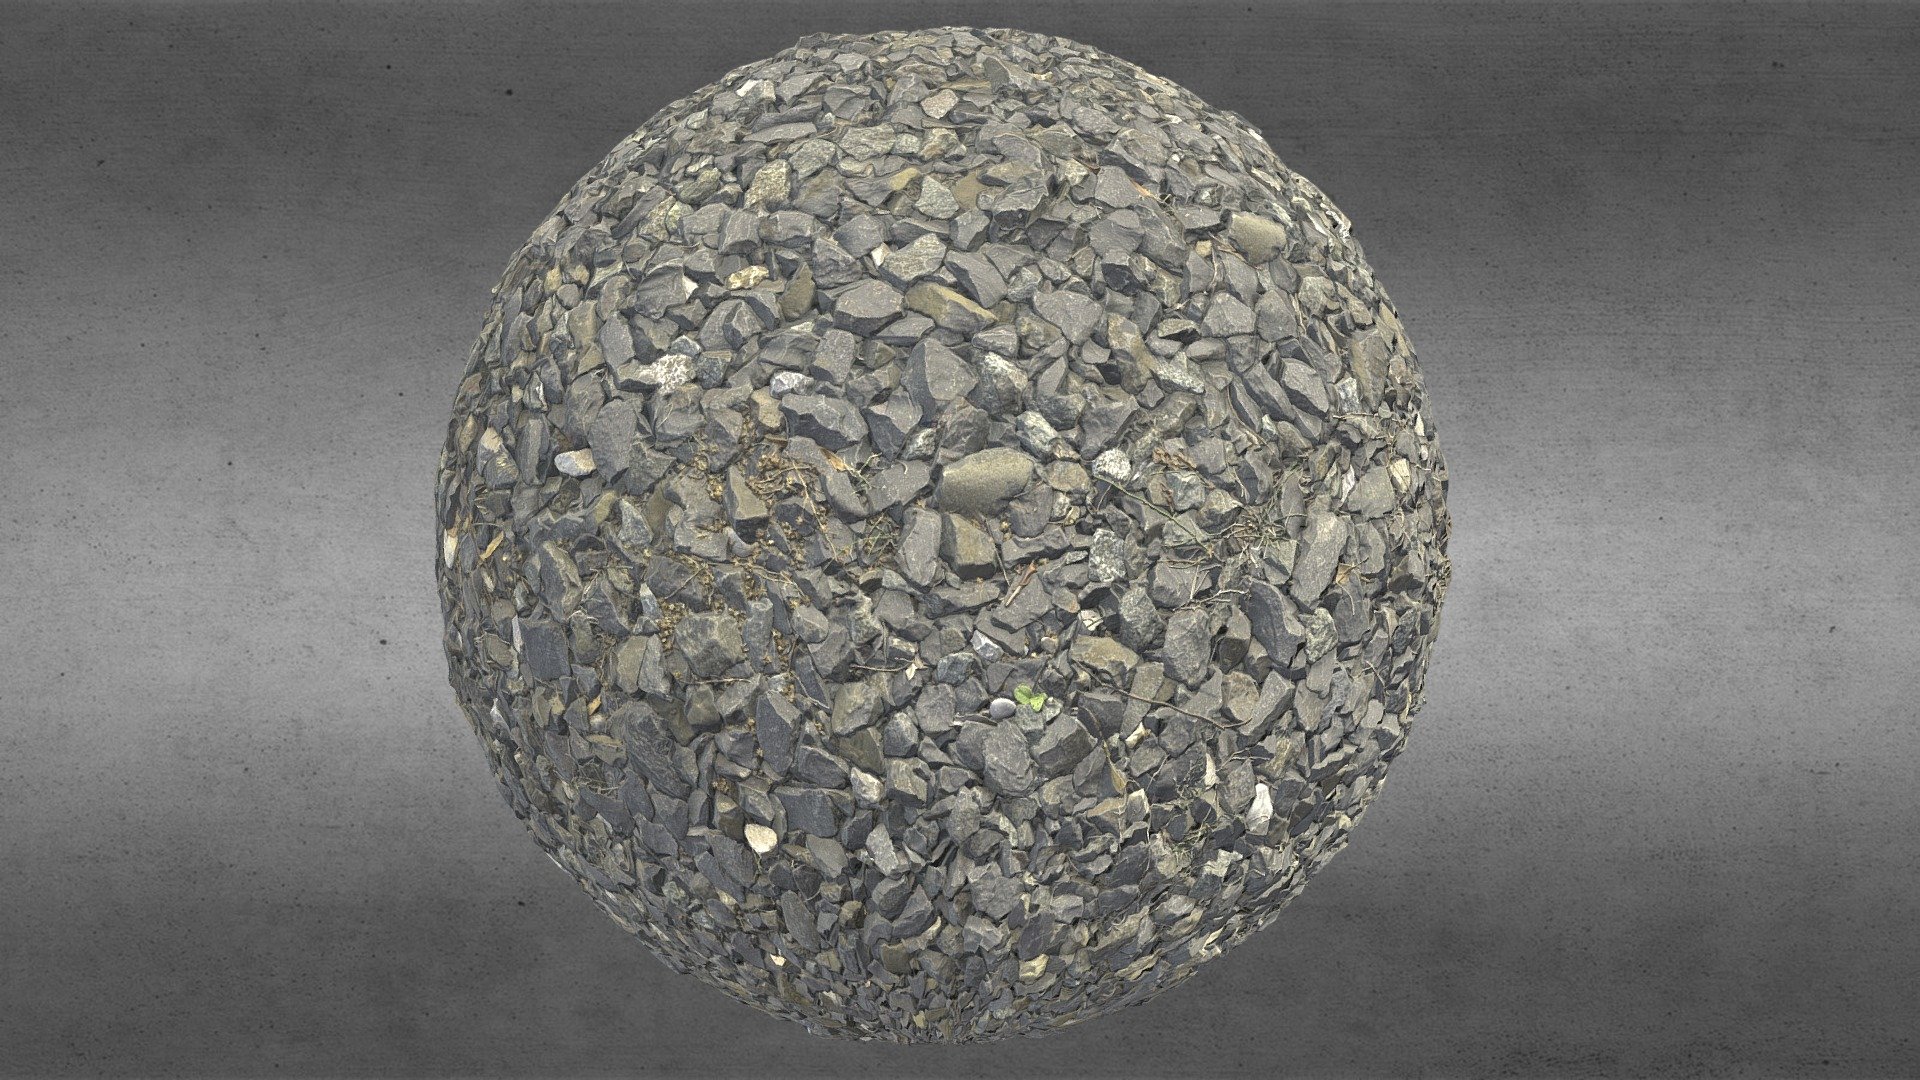 Photogrammetry Material.
Railway gravel (Ventimiglia-Cuneo-Nice railway line) 

4k texture displayed (Sketchfab gives problems when I try to upload 8k).
8k textures included.
Tileable, PBR
Maps:


Base Color
Normal
Roughness
Height
Ambient Occlusion

 - Railway gravel 4k/8k Tileable Material (Scan) - Buy Royalty Free 3D model by Stefan-Limon (@Stefan-I-O) 3d model